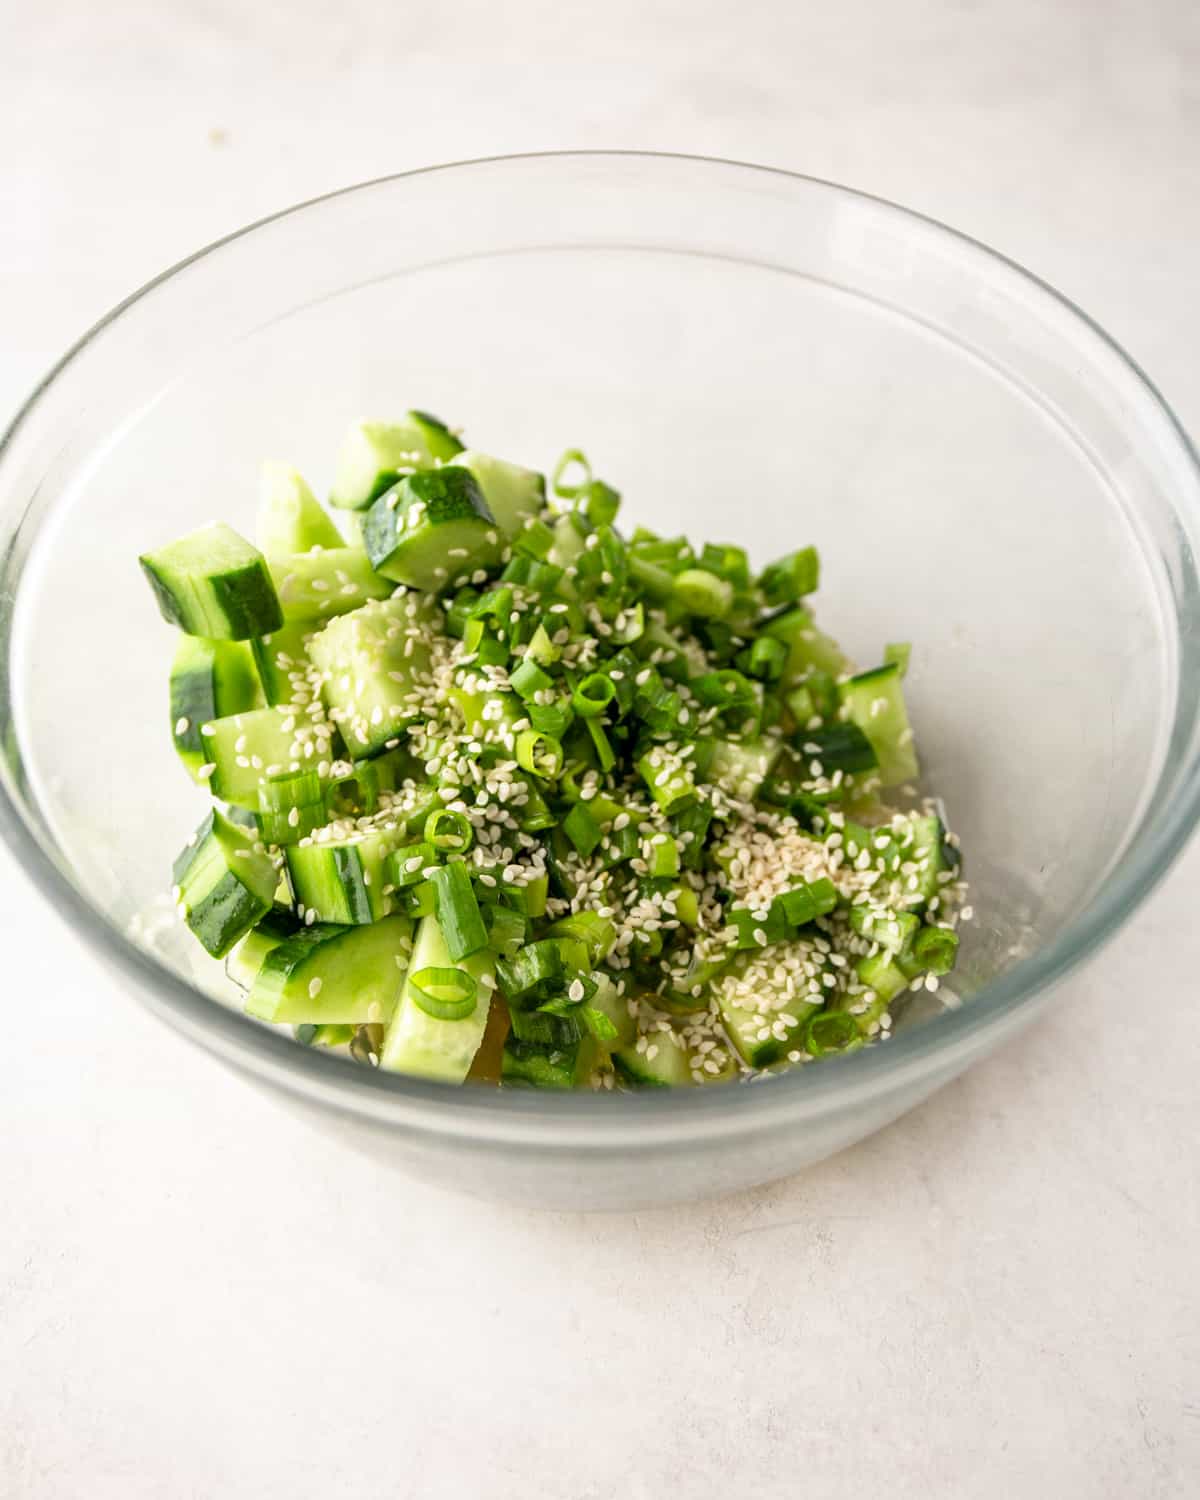 cucumbers, green onions and sesame seeds in a clear glass bowl